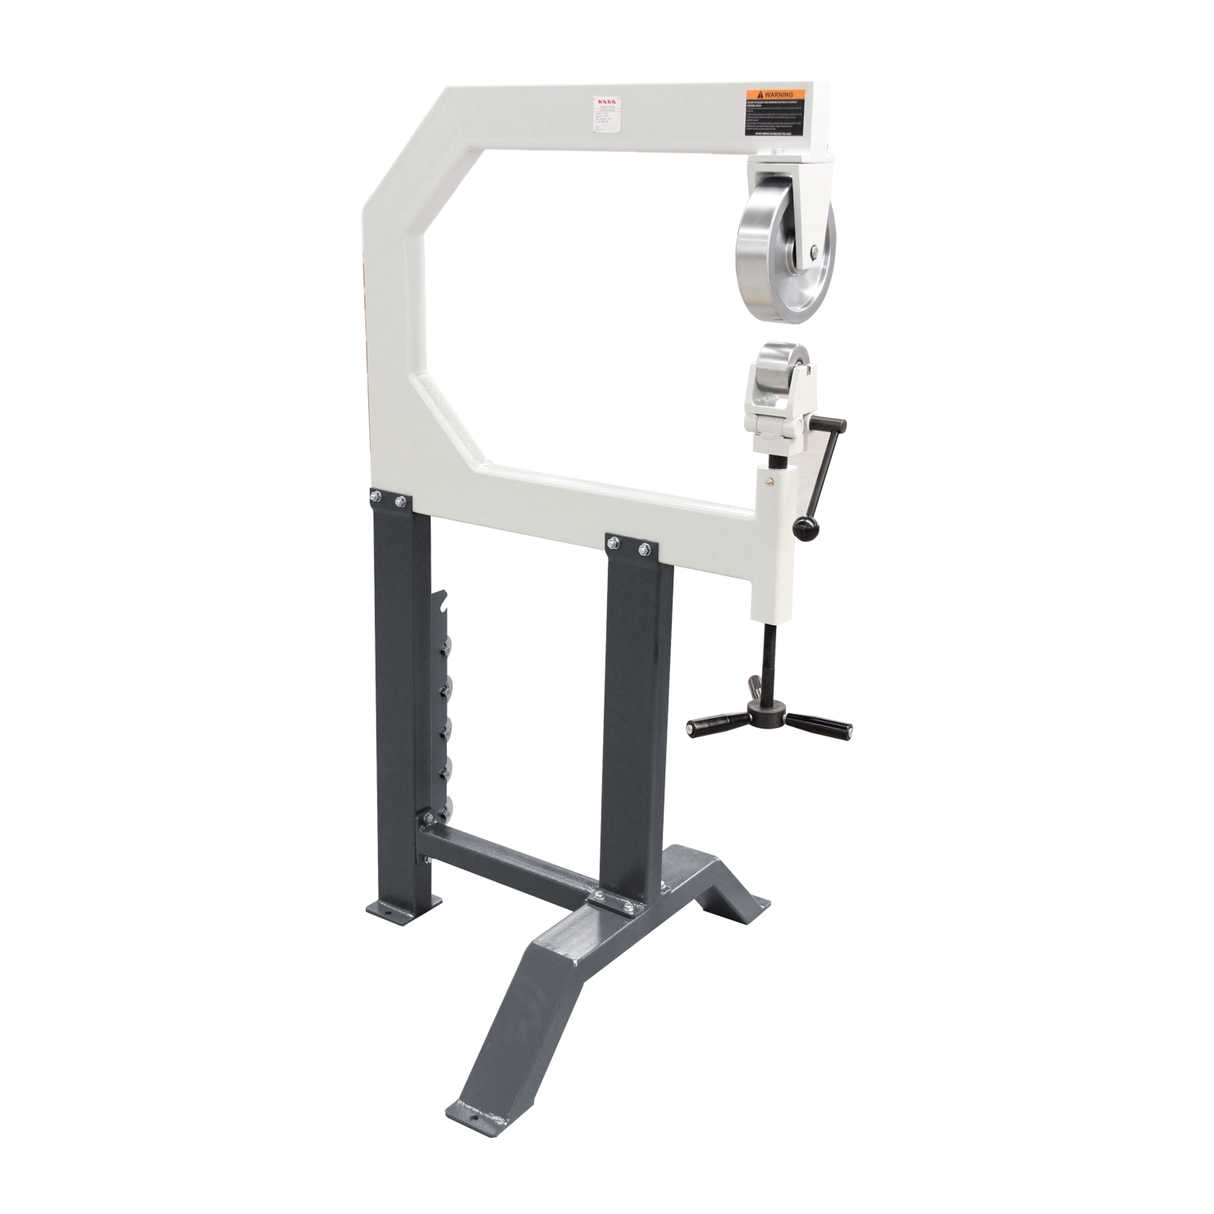 WORKS WITH A VARIETY OF MATERIALS: This machine can handle up to 18 gauge in mild steel and 14 gauge in aluminum, making it perfect for a variety of projects.